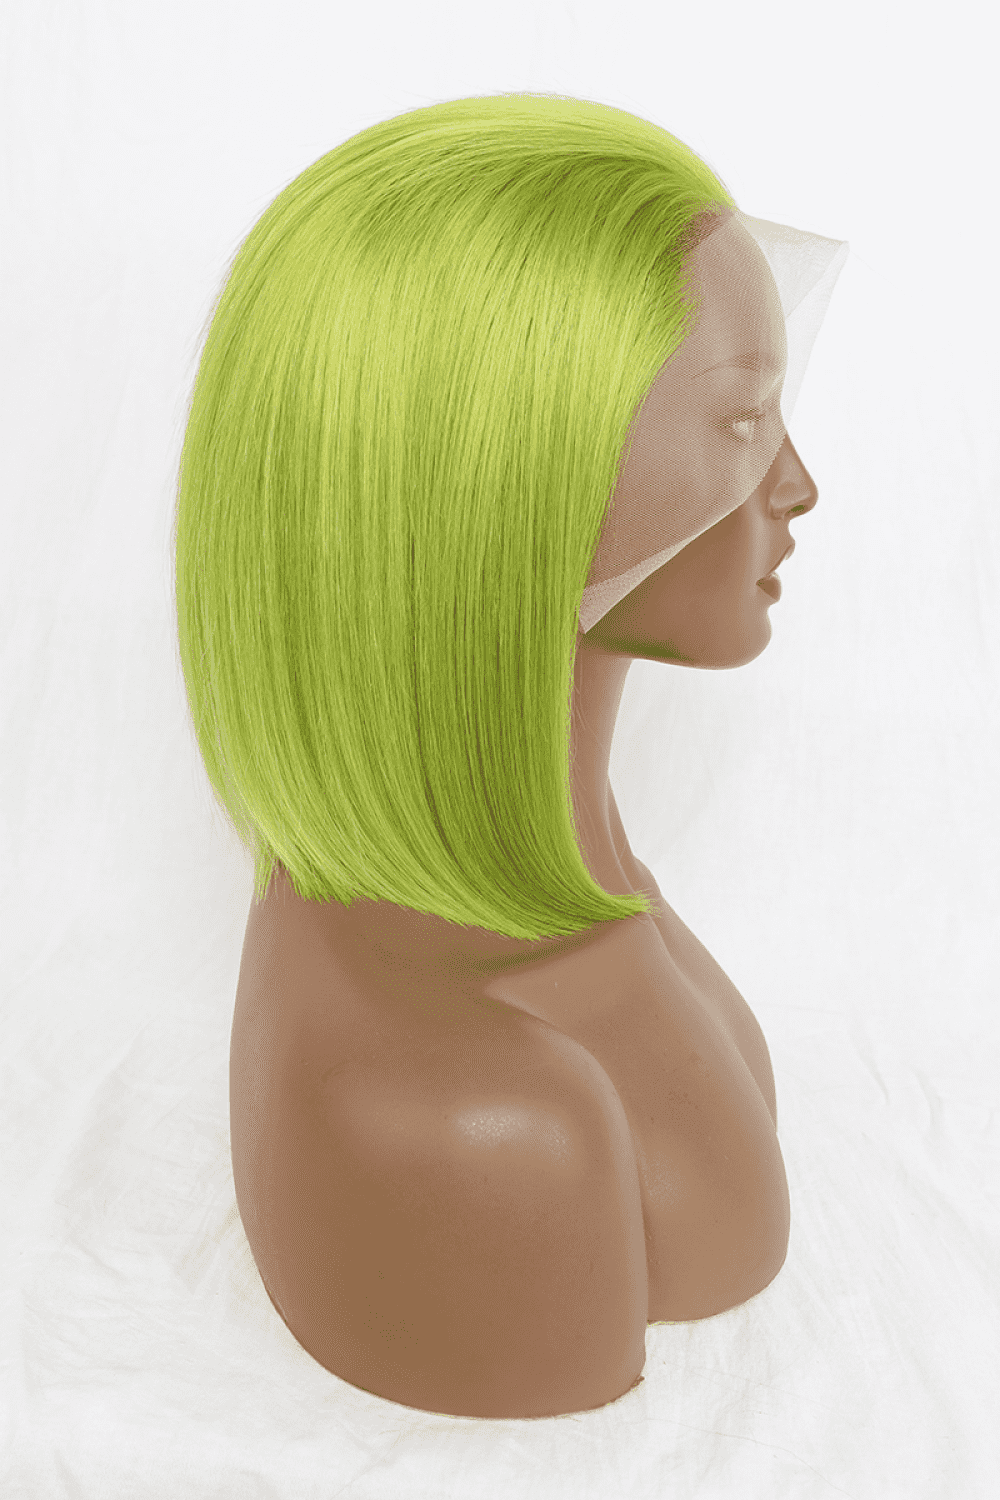 a mannequin head with a bright green wig